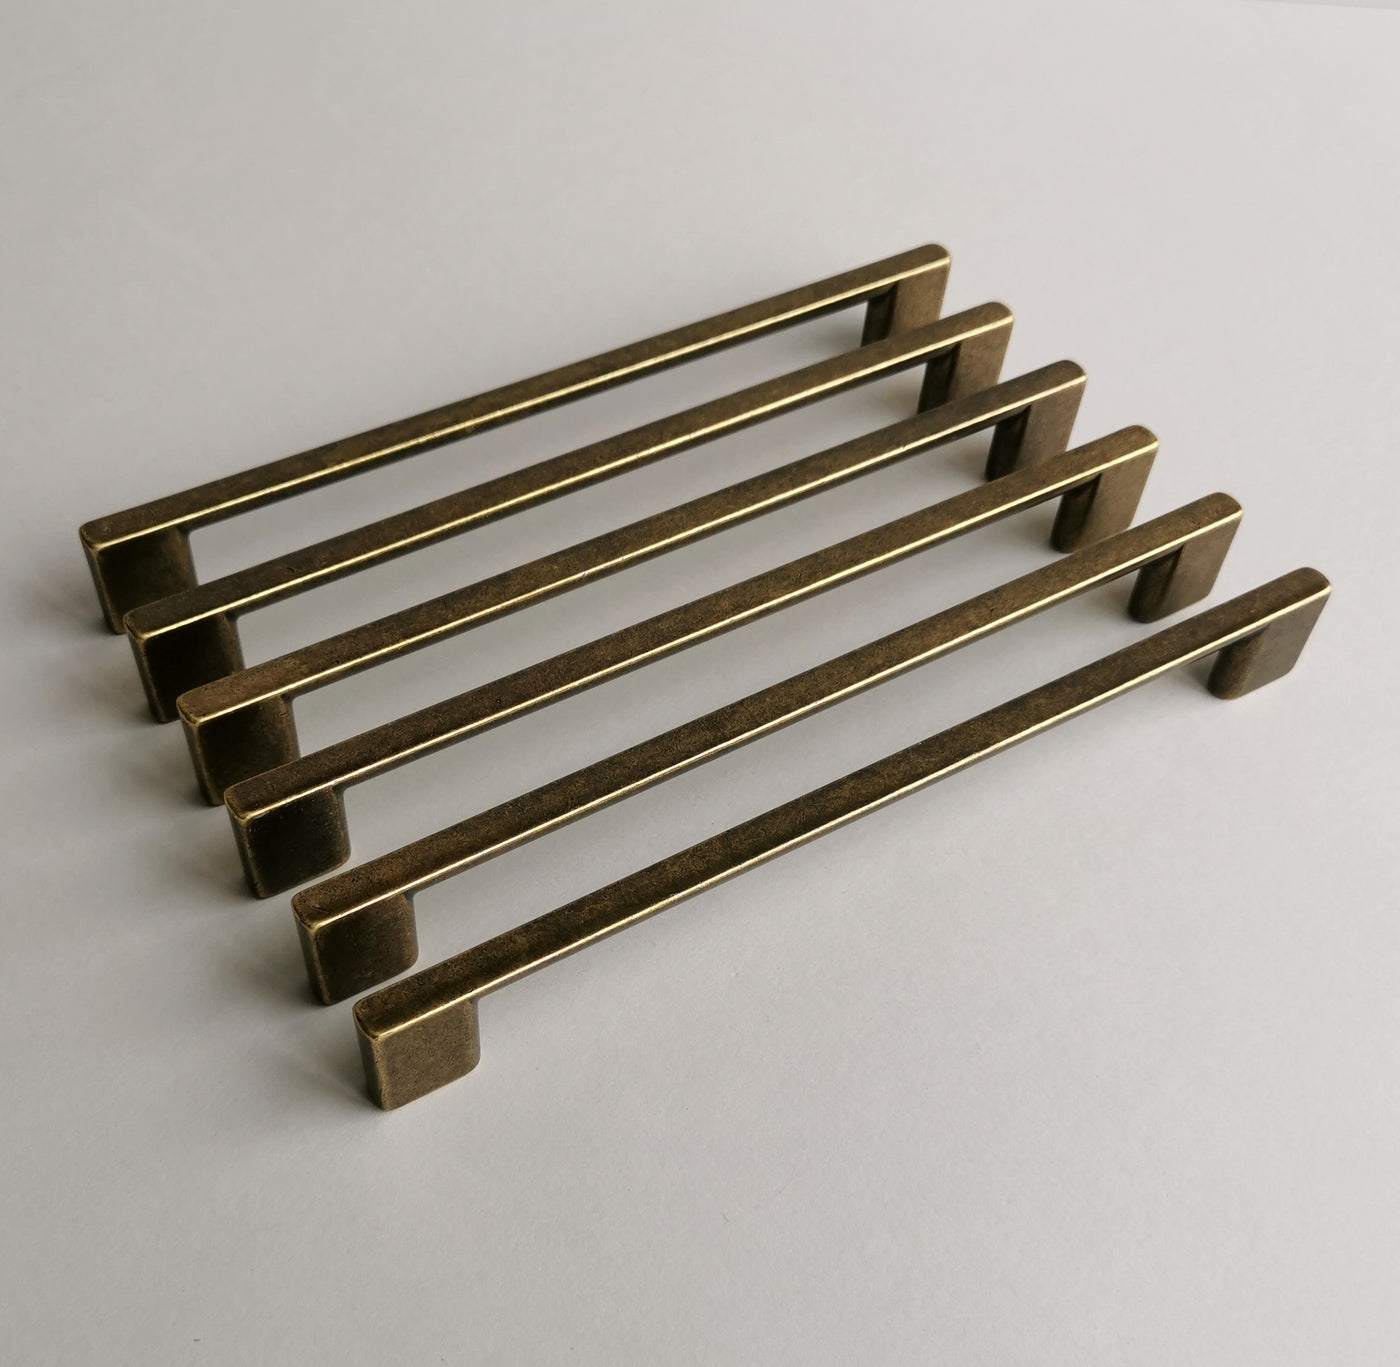 Set of 6 Antique Brass Finish Cabinet Pulls. Rustic Cabinet